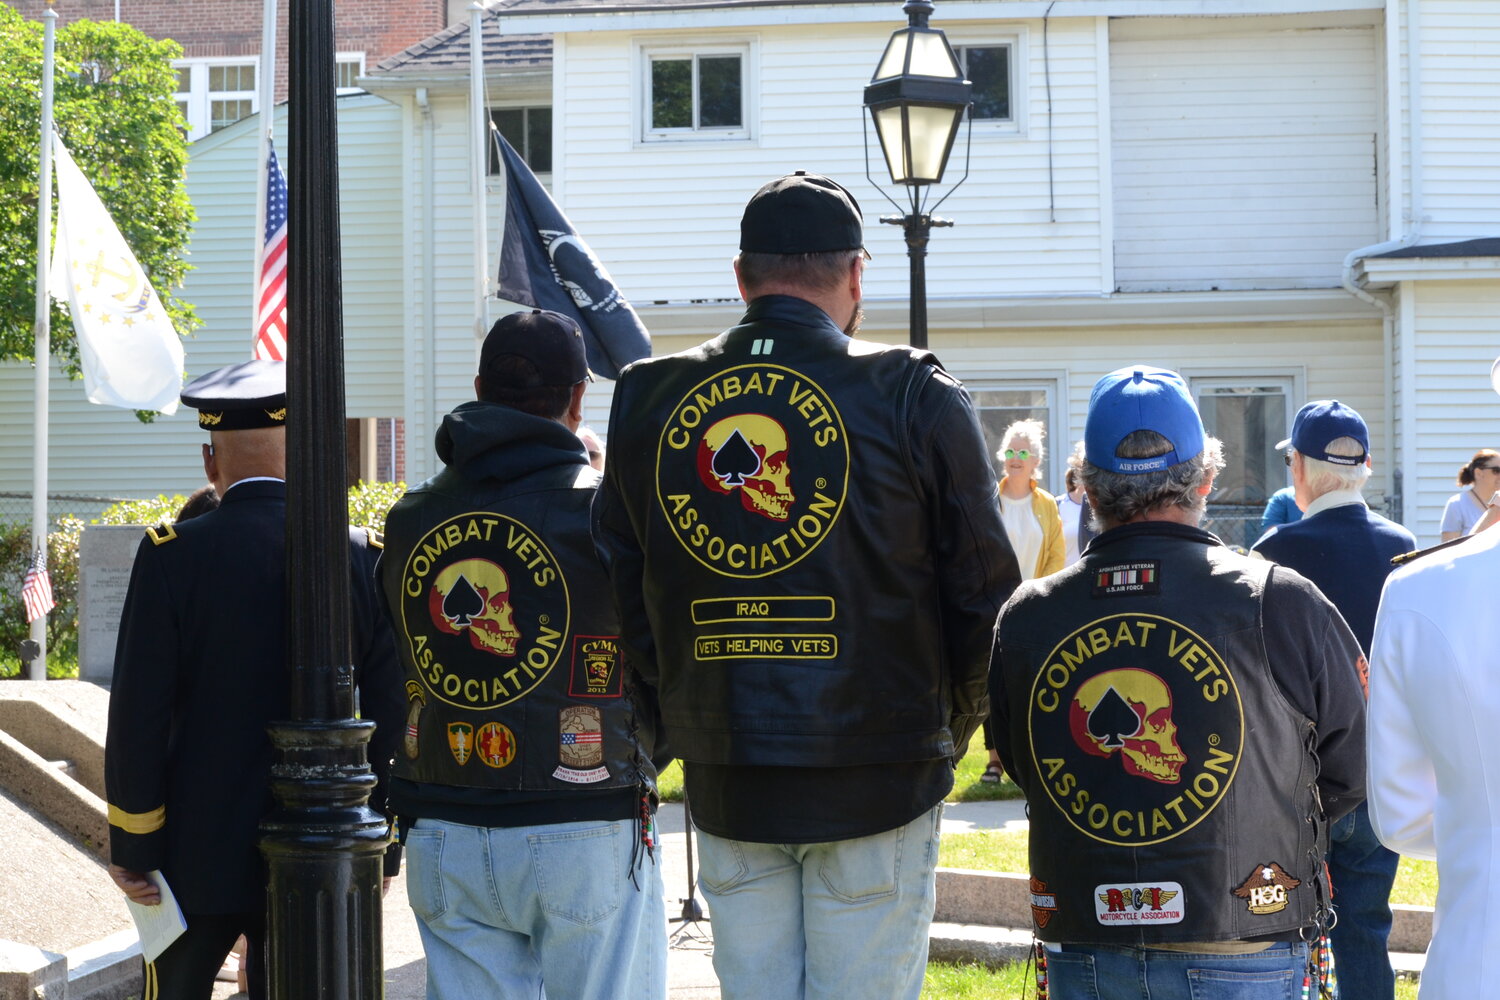 Francisco Chaves (military police), Derik Von Recum (U.S. Army), and Joe Delfino (U.S. Air Force) listen during the ceremony on the Town Common on Monday morning. All three are members of the Rhode Island chapter of the Combat Veterans Association.